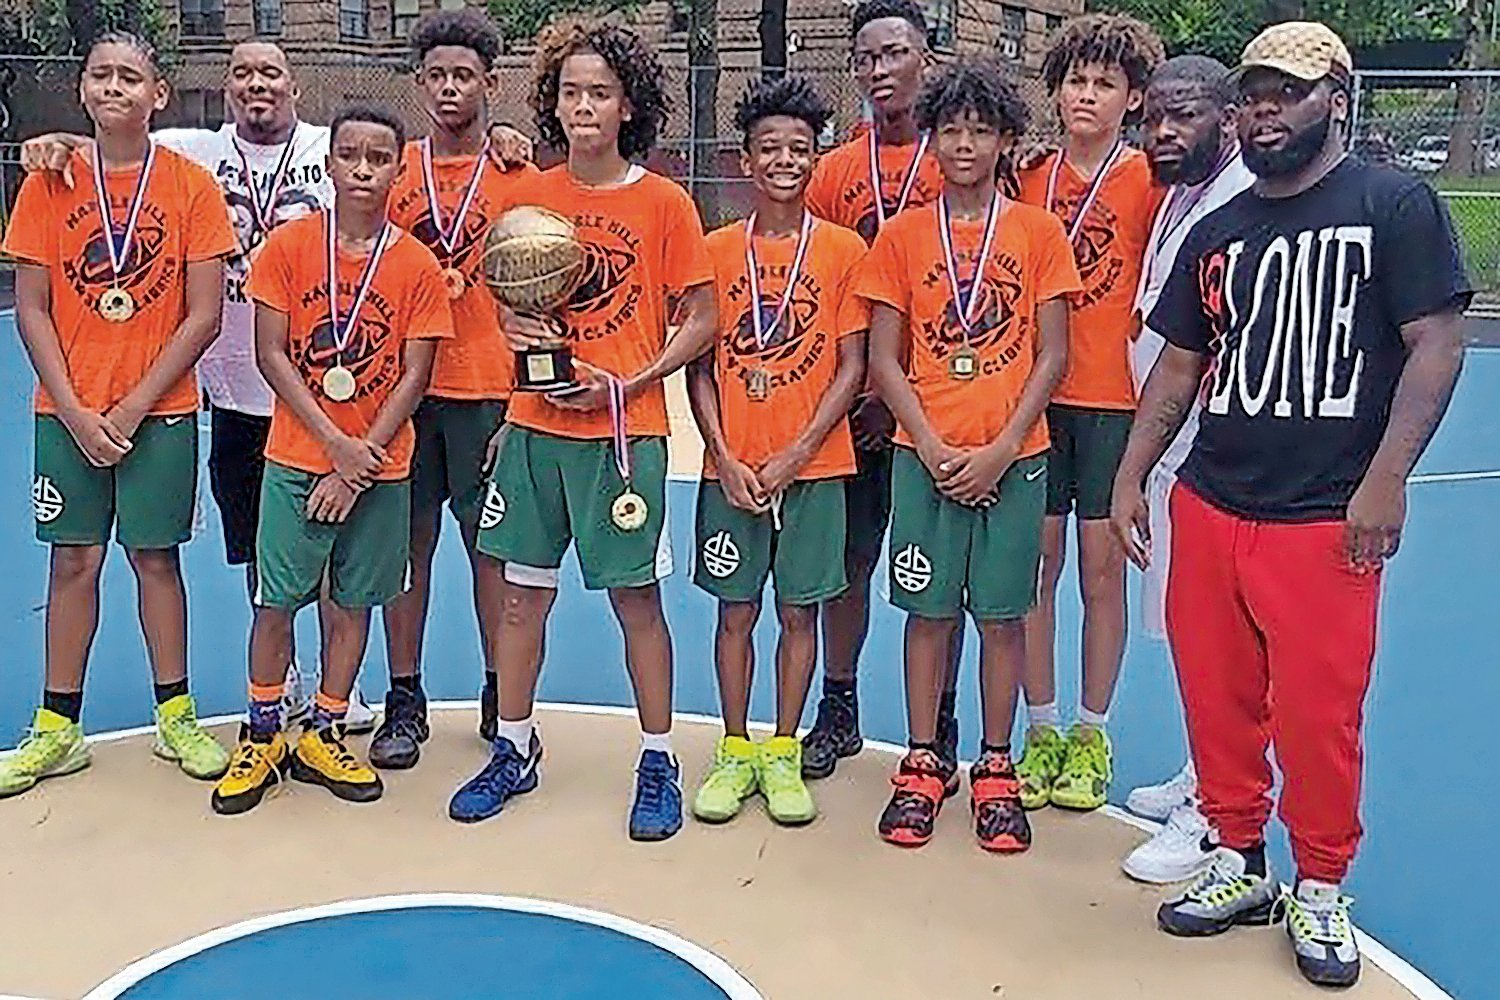 The Castle Athletics took the Under-13 Championship at the Marble Hill New Era Classic in 2021. The games are back up and running this summer and will conclude on Aug. 20 with the championship round.